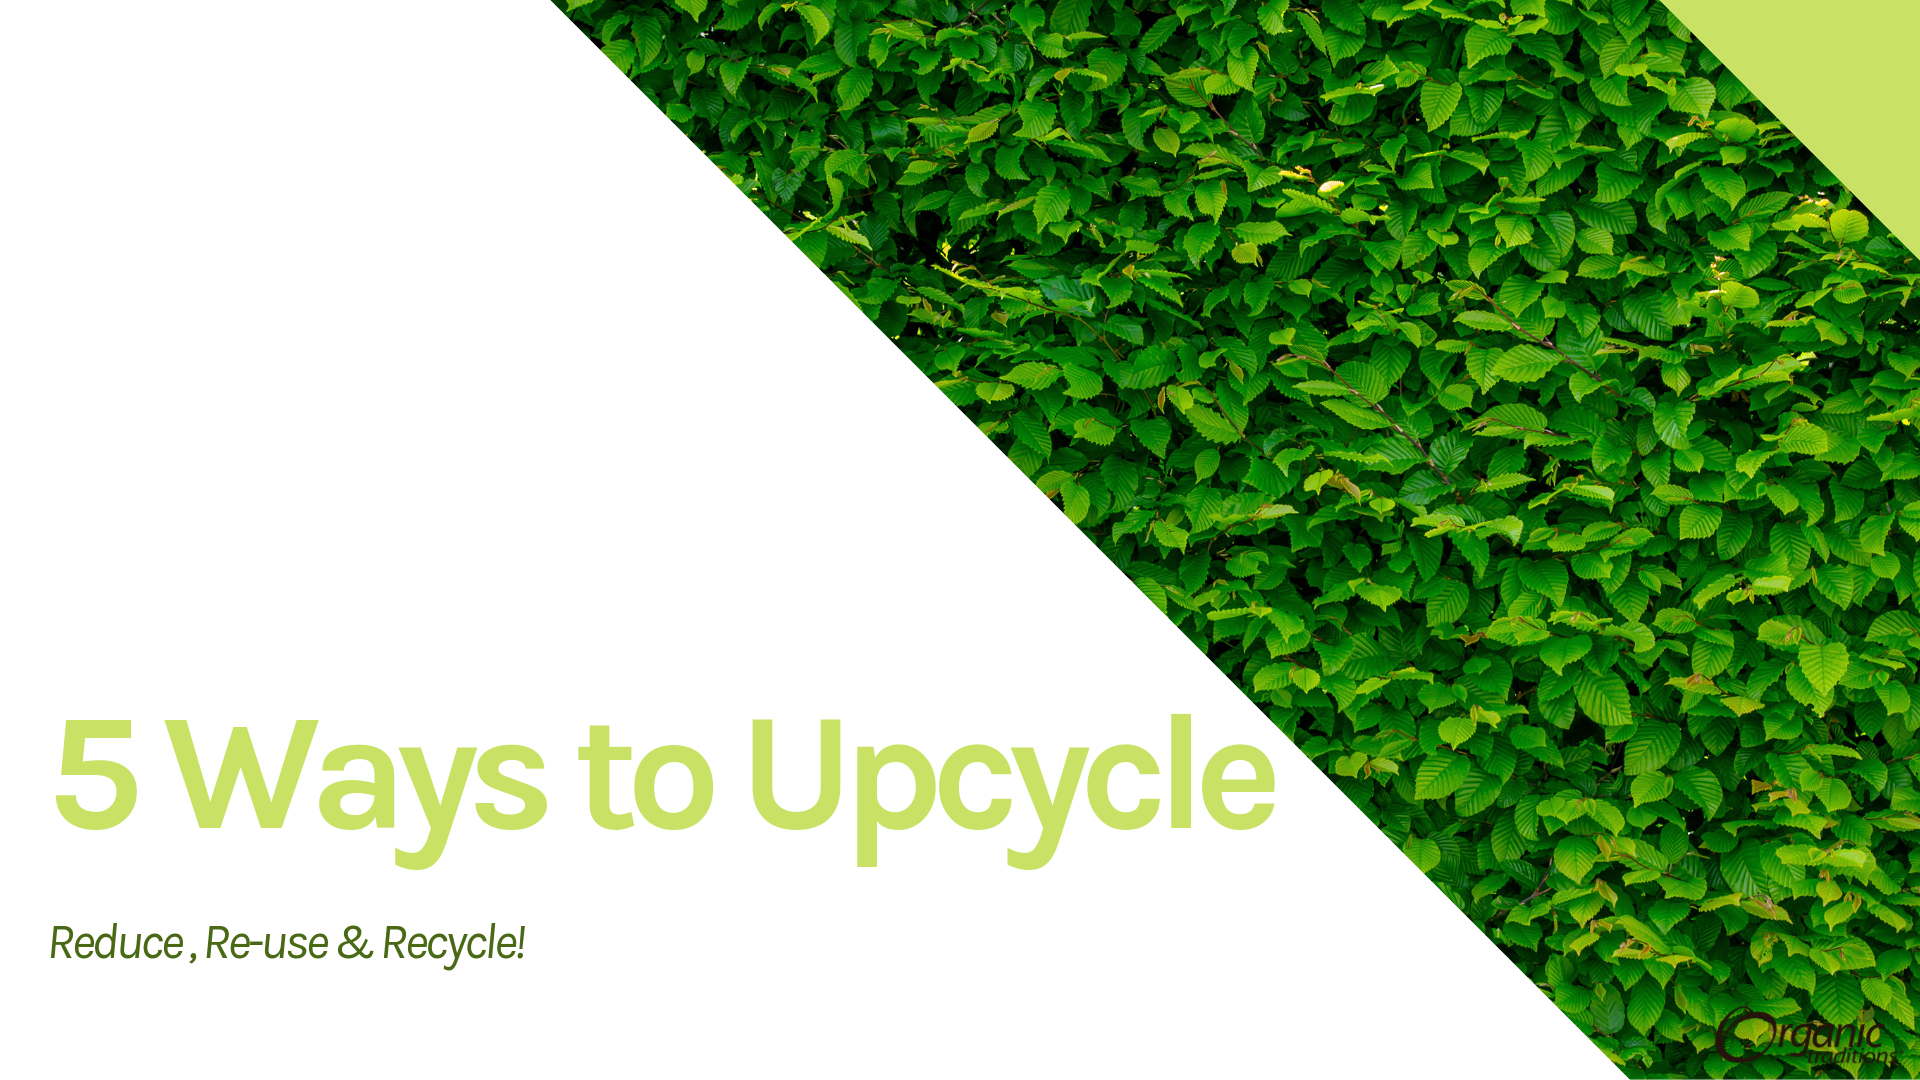 5 Ways to Upcycle